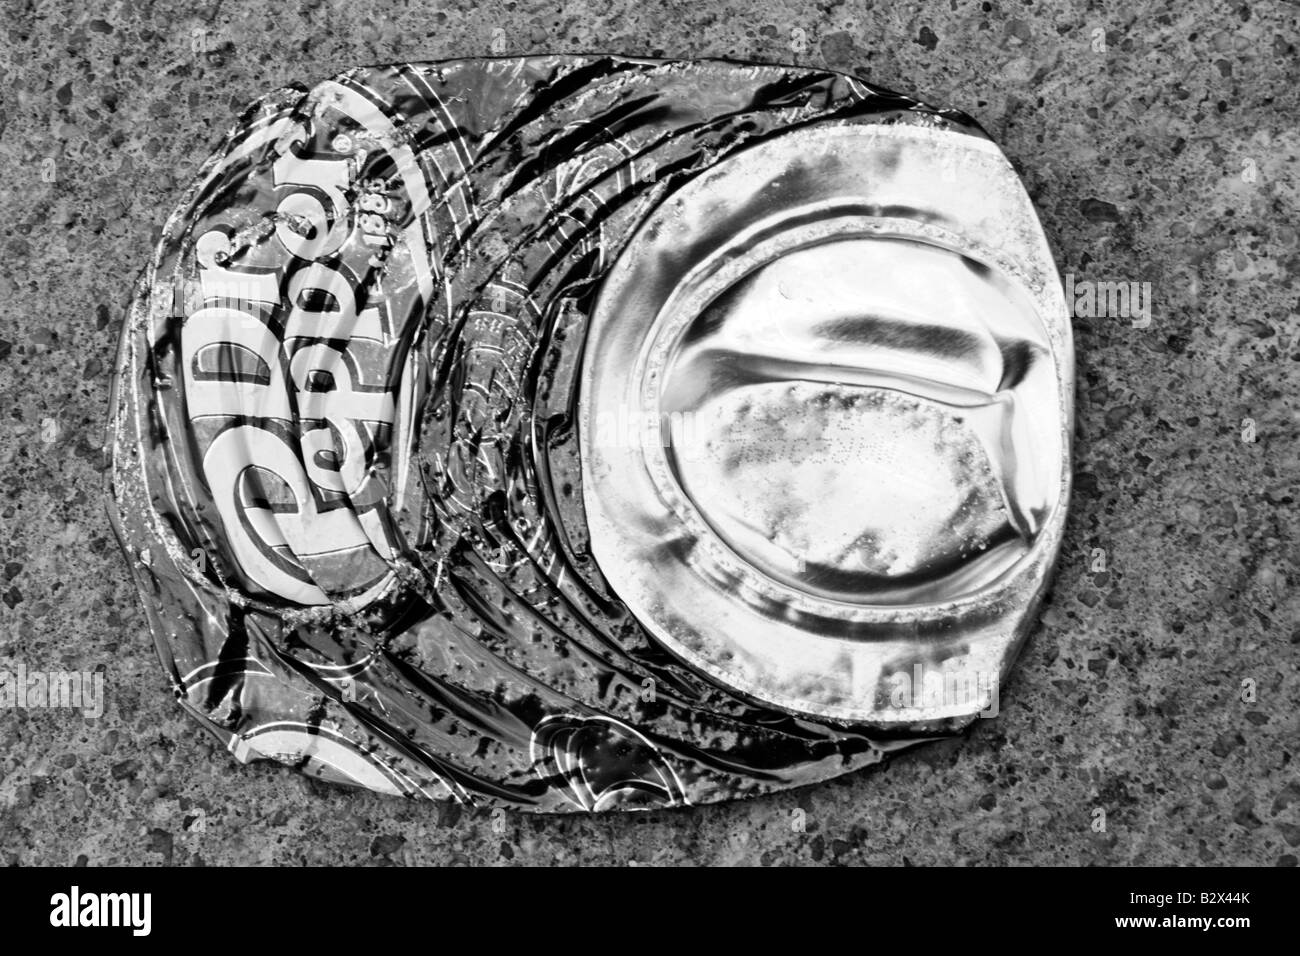 Aluminum soda pop can flattened sideways in concentric rings on concrete. Stock Photo